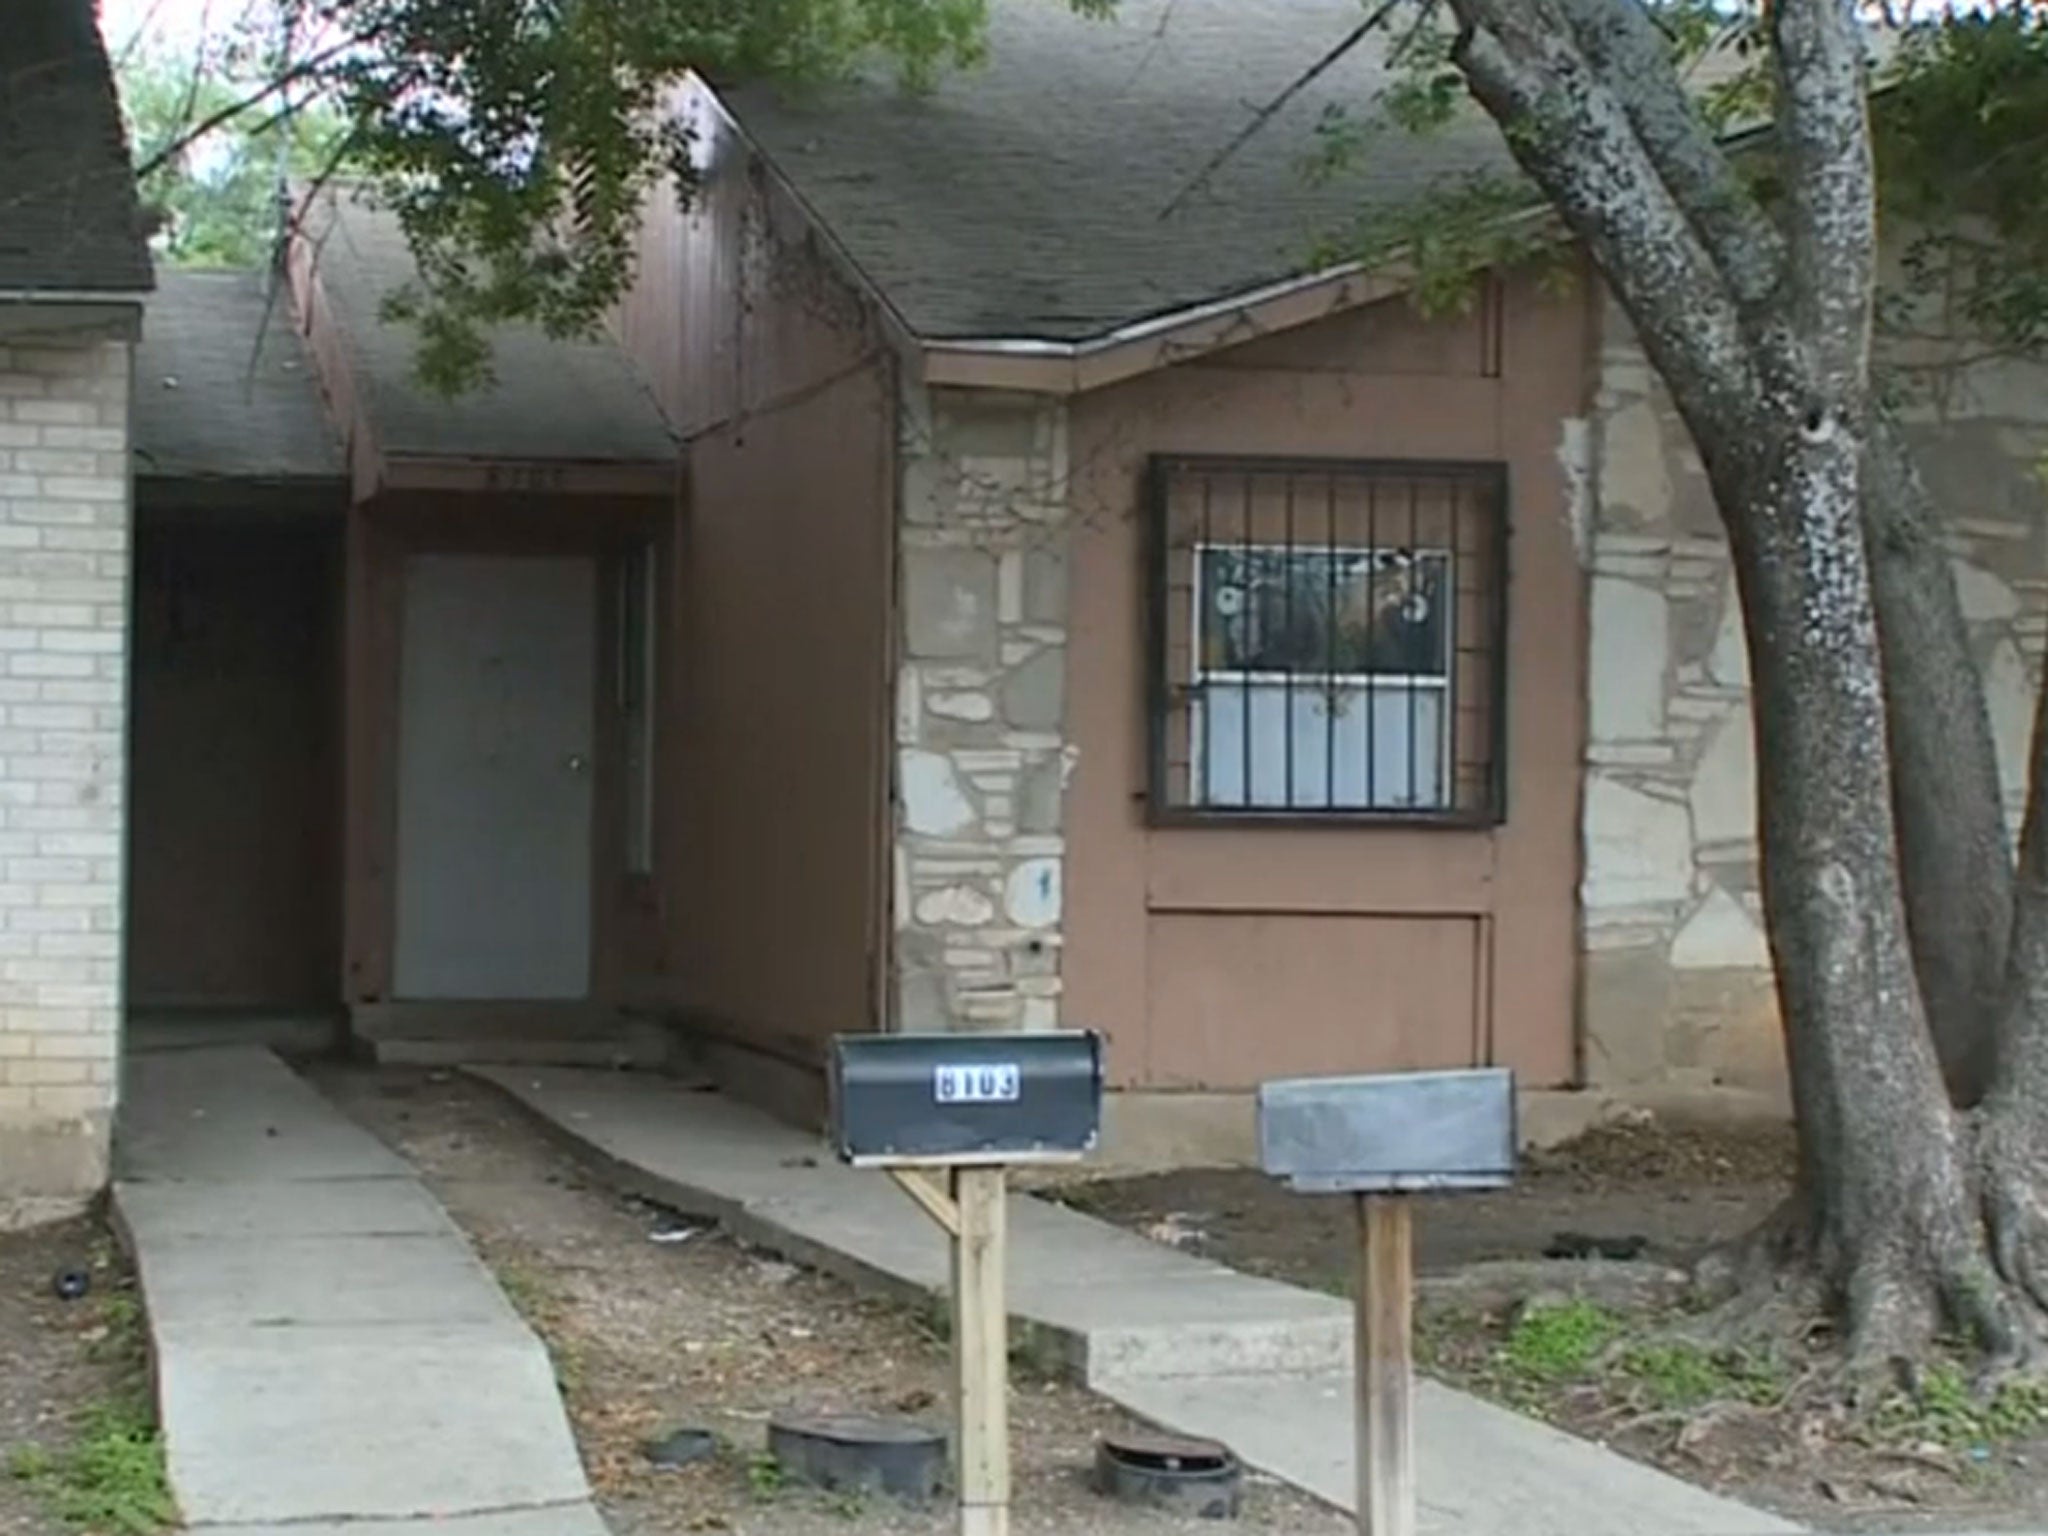 The San Antonio house where the two young children were discovered by deputies